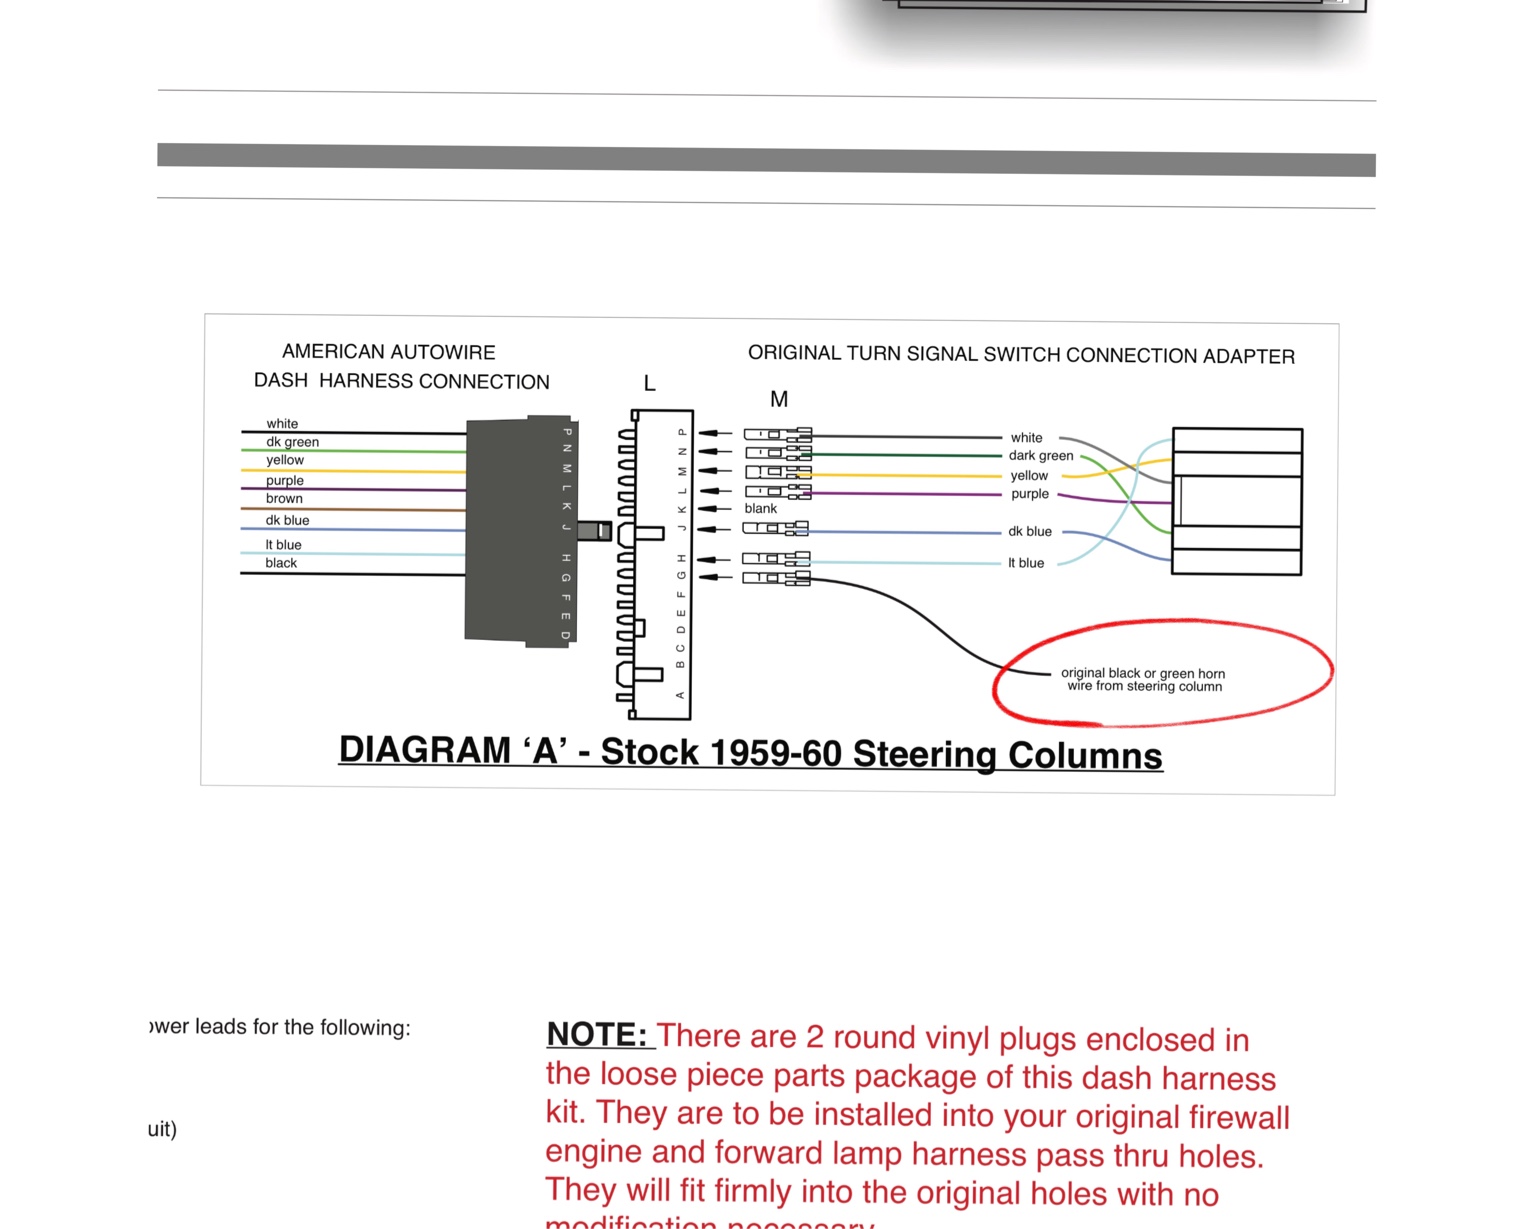 Technical - GM column wiring question - American Autowire kit | The H.A